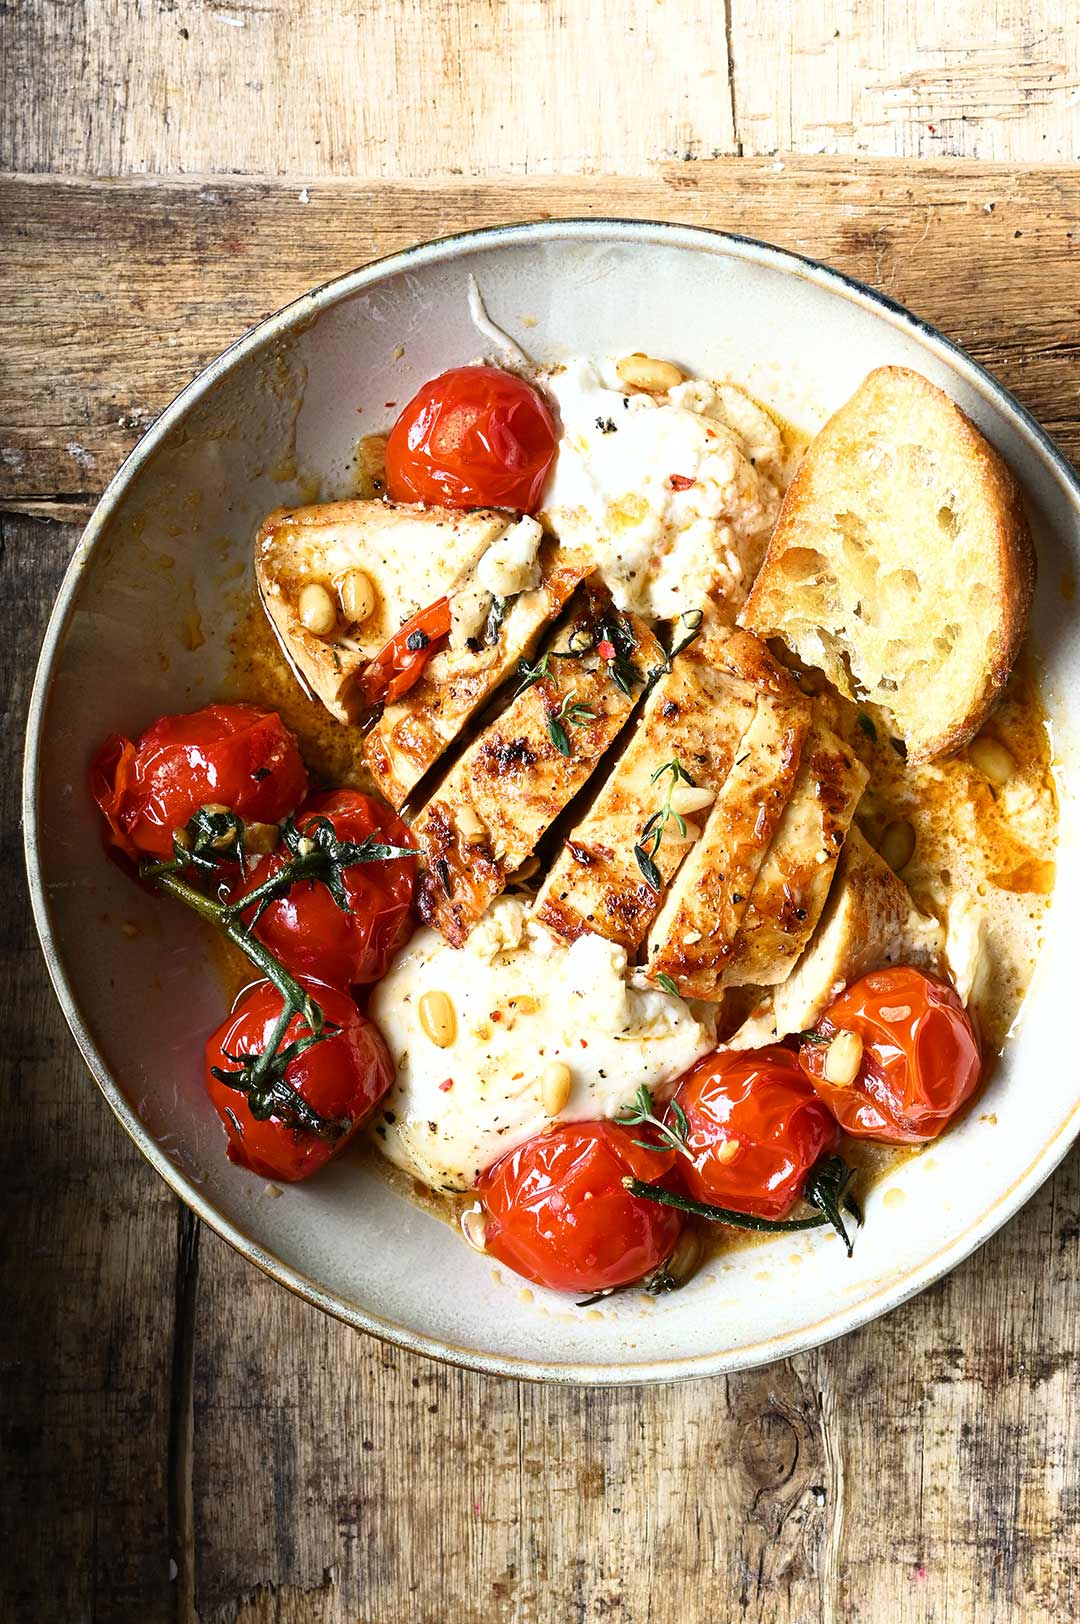 30 Minute Chicken with Braised Tomatoes and Burrata - Serving Dumplings